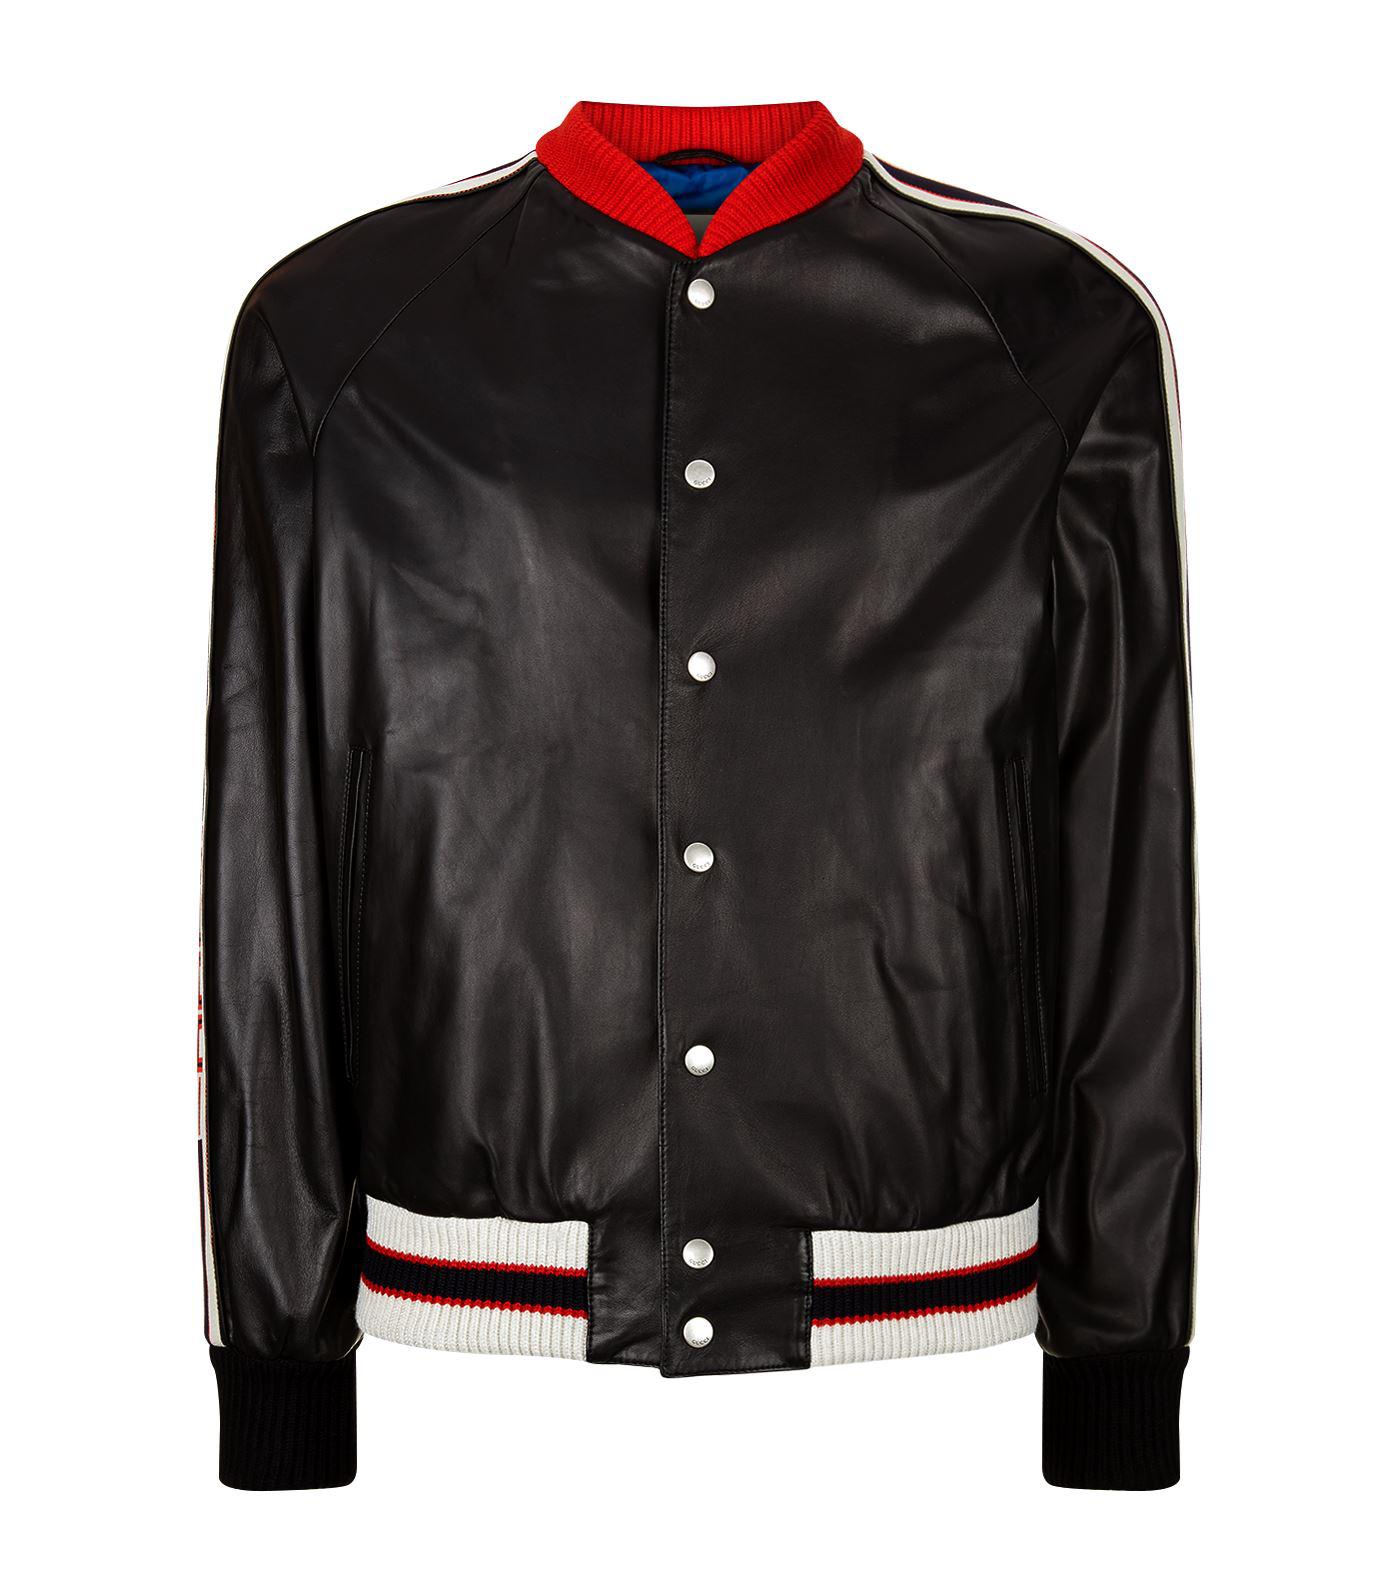 Gucci Hollywood Leather Bomber Jacket in Black for Men - Lyst